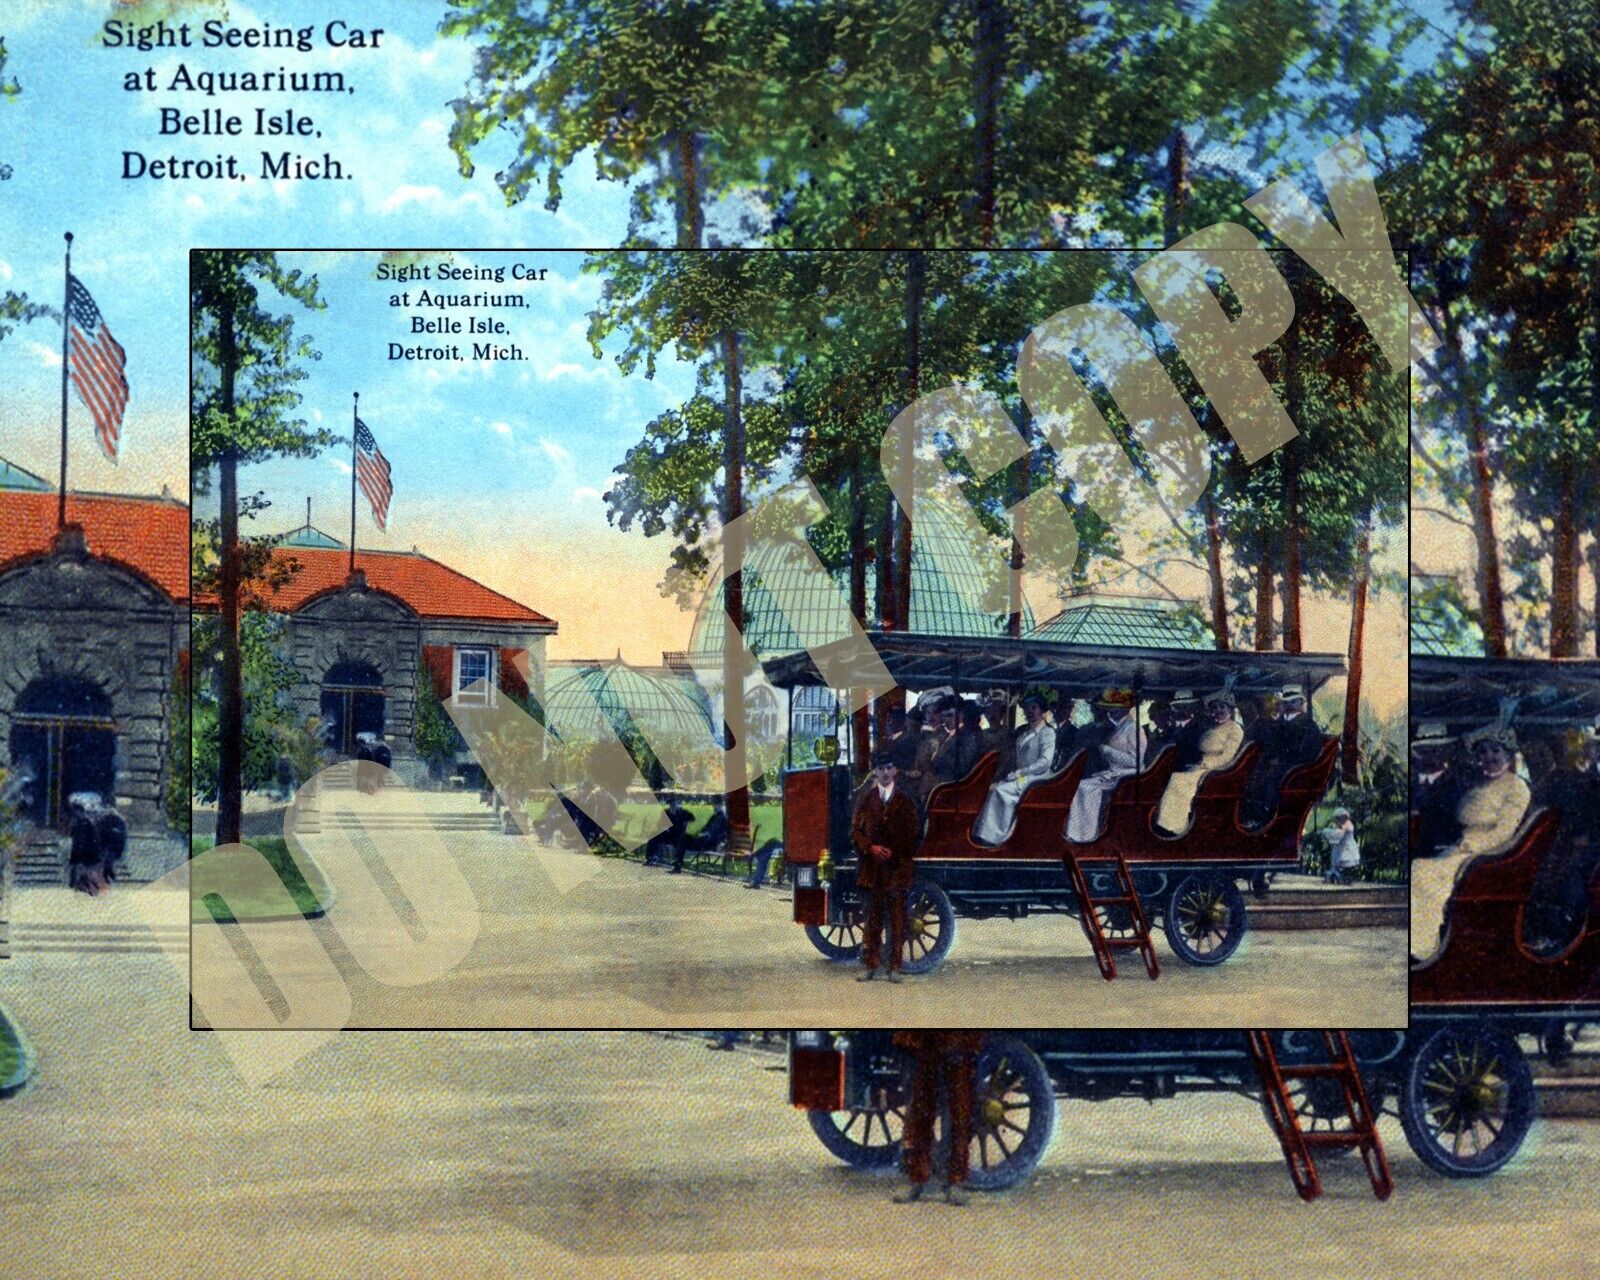 Sight Seeing Car at Aquarium On Belle Isle In Detroit From Post Card 8x10 Photo